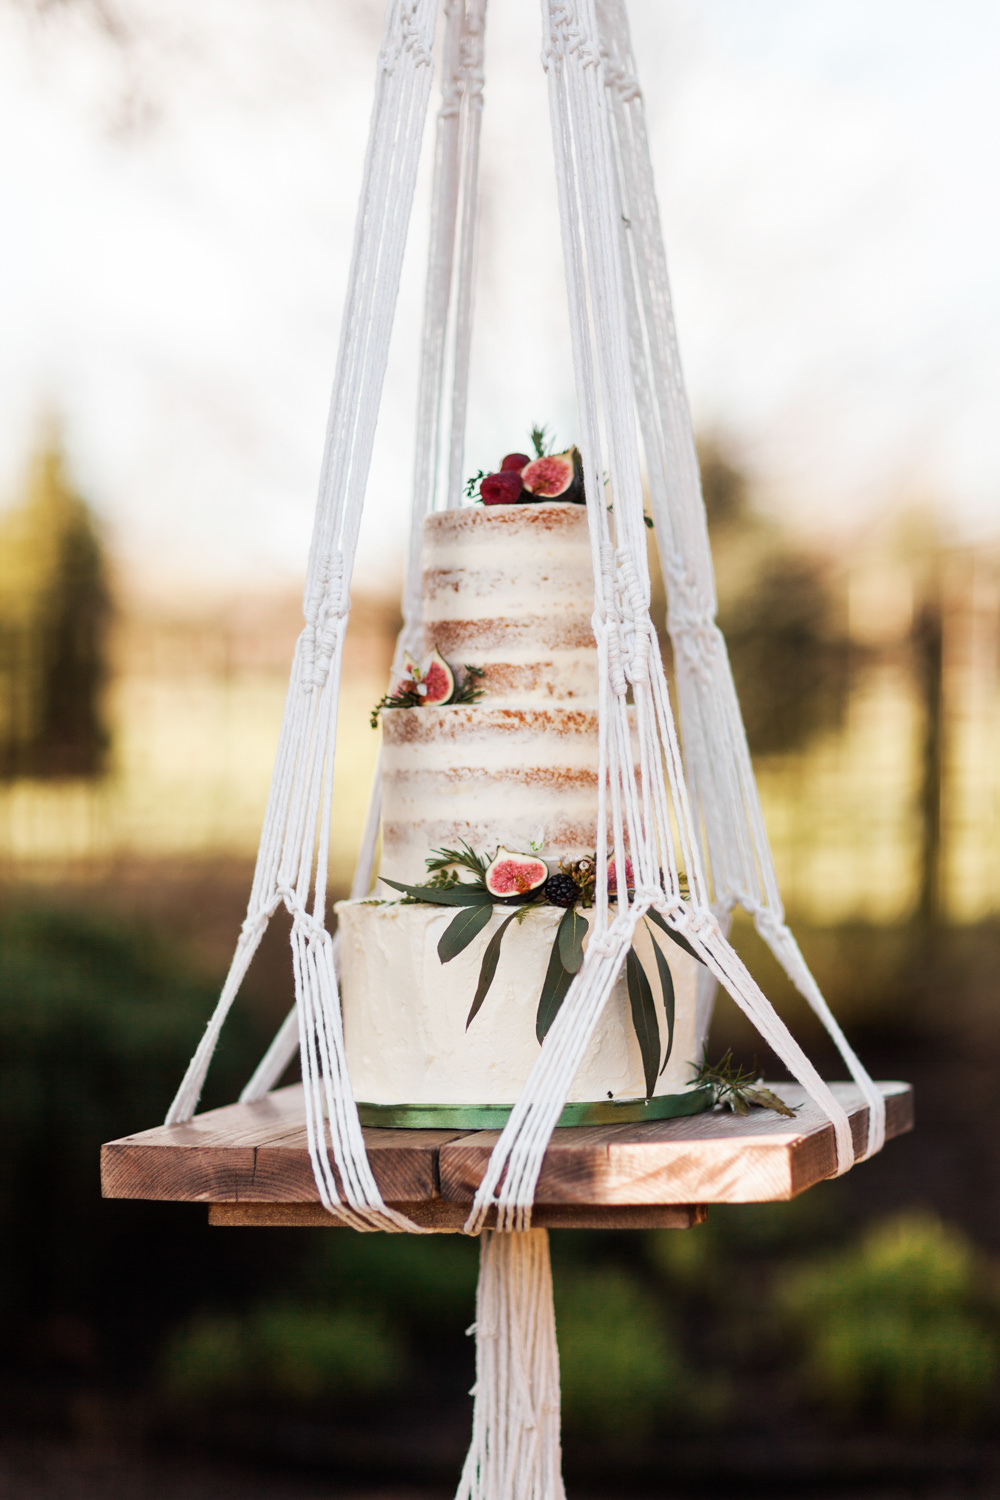 Boho vibes with this semi-naked fig wedding cake on a macramé hanging swing. // Jaw-dropping suspended cake display ideas for your wedding day. // mysweetengagement.com